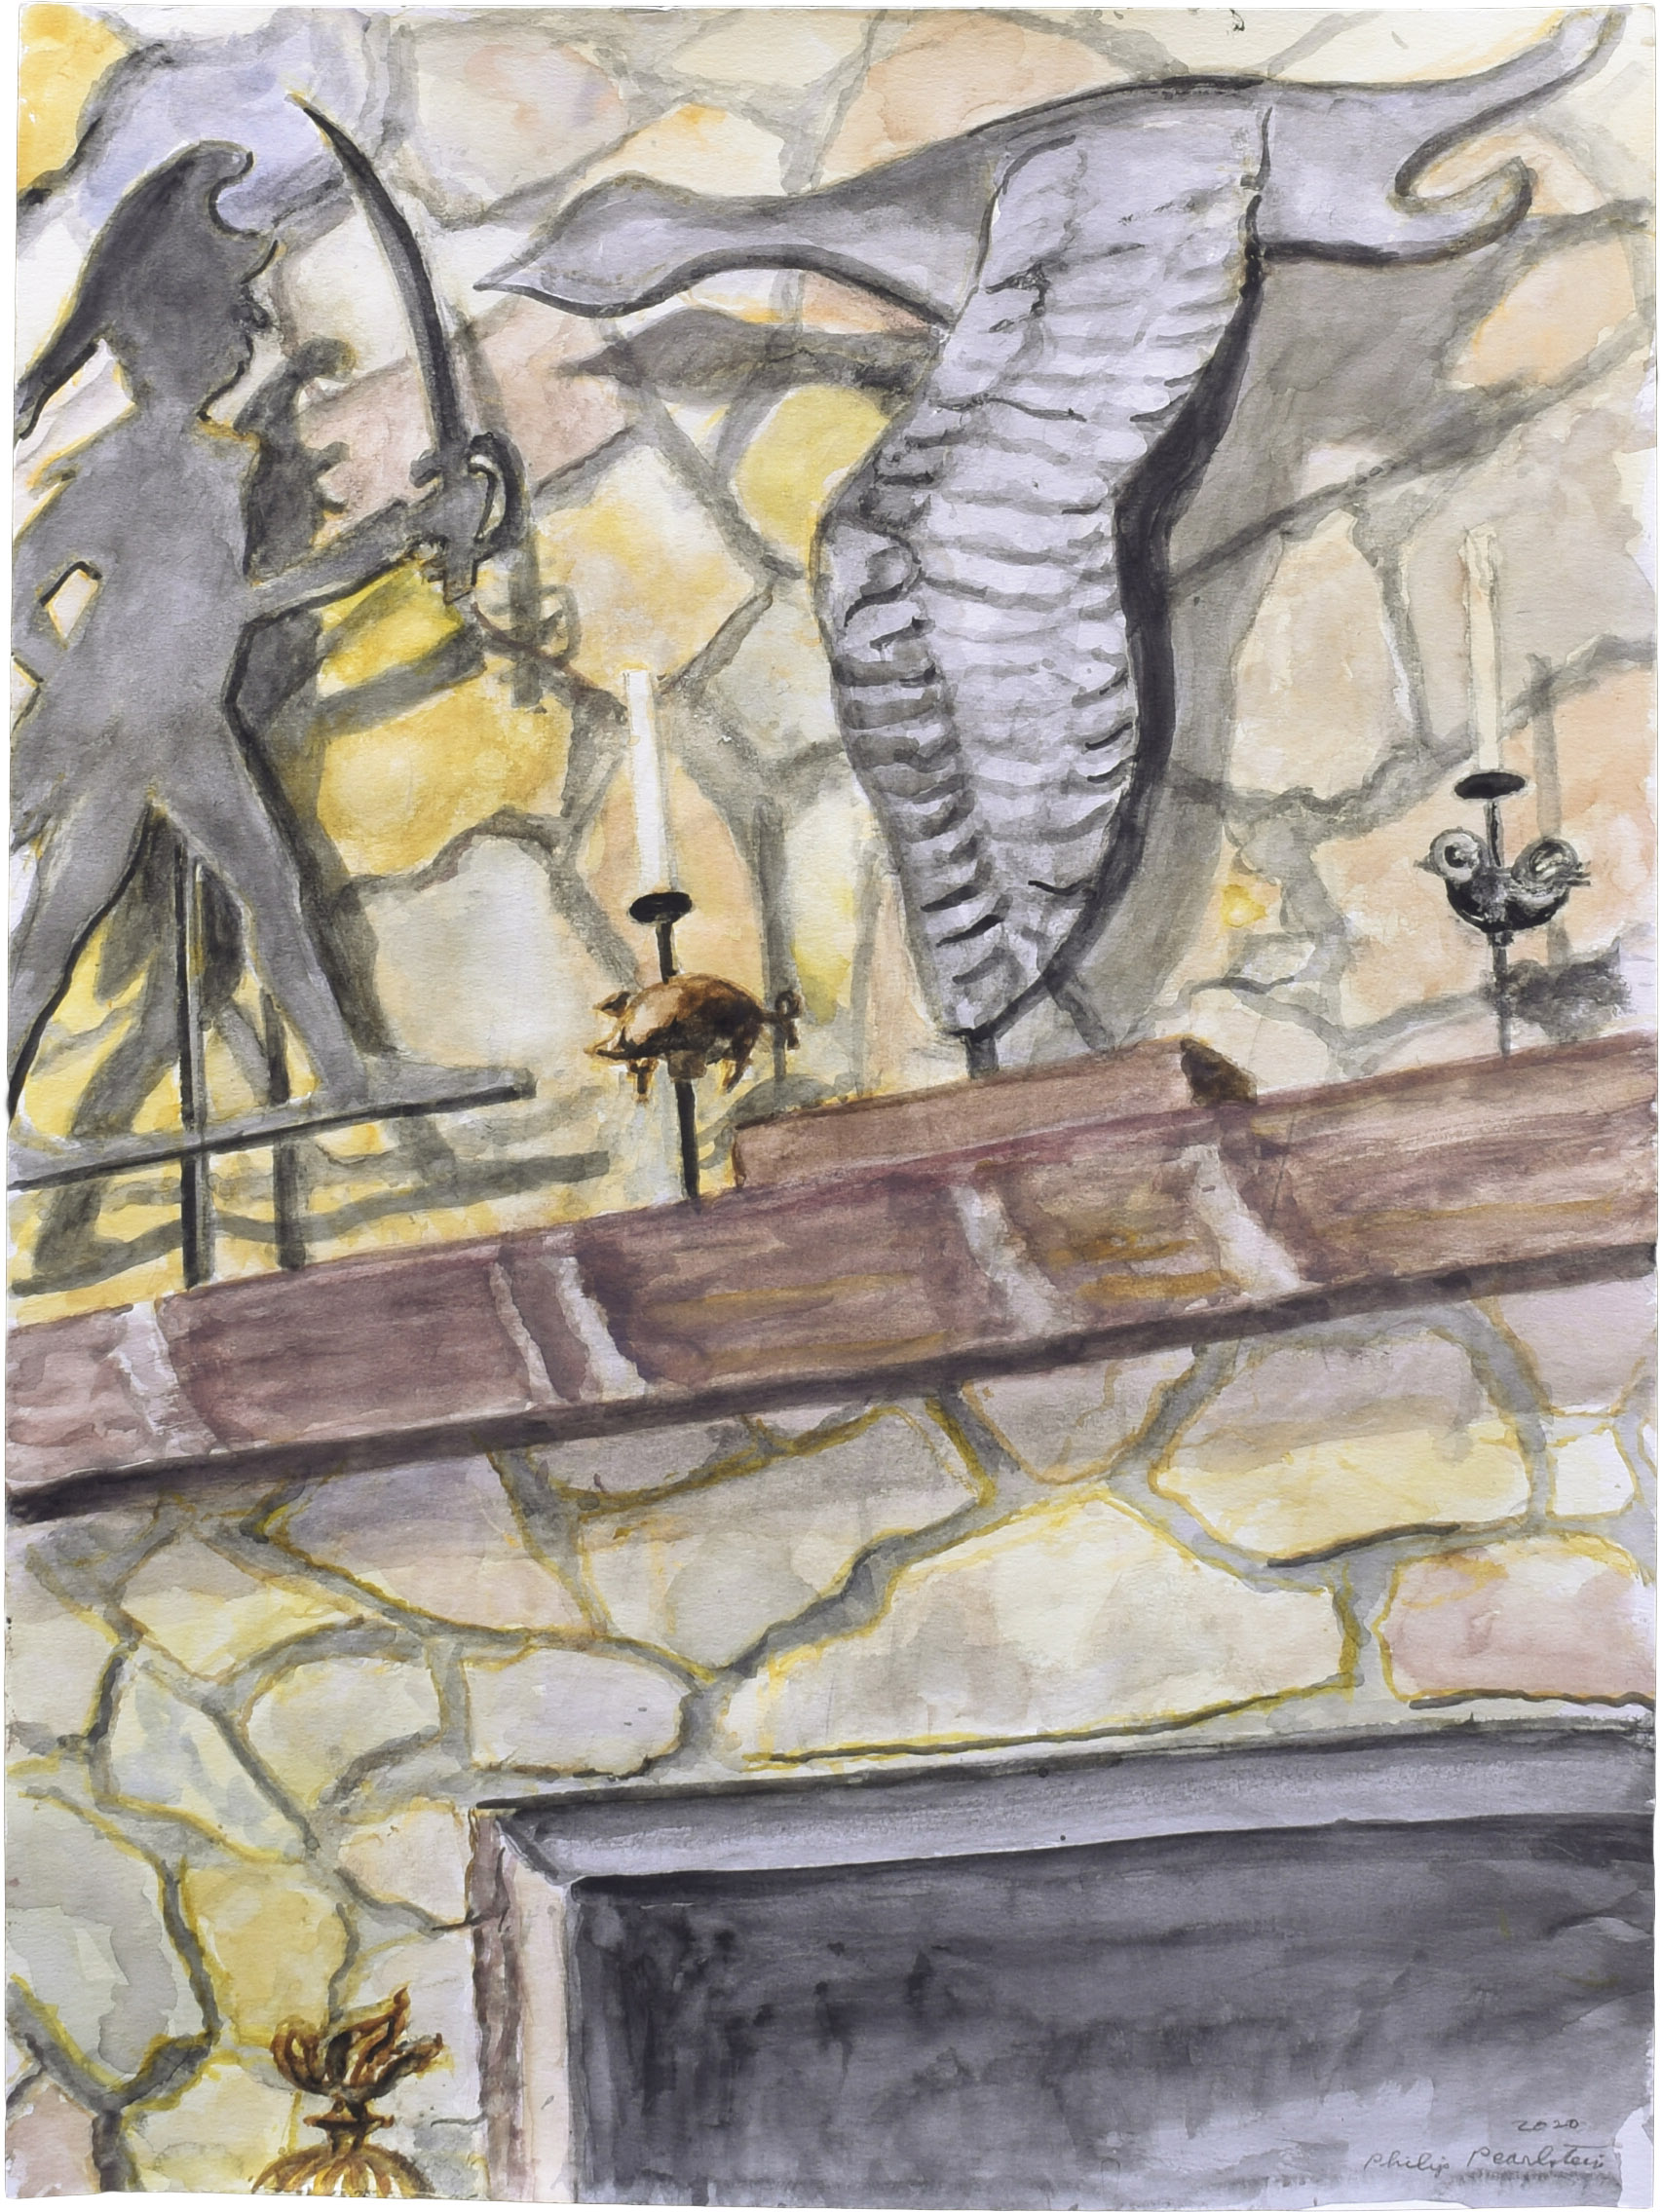 2021 Two Weathervanes Hessian Soldier Confronting a Flying Goose Watercolor on Paper 24 x 18 PP16810